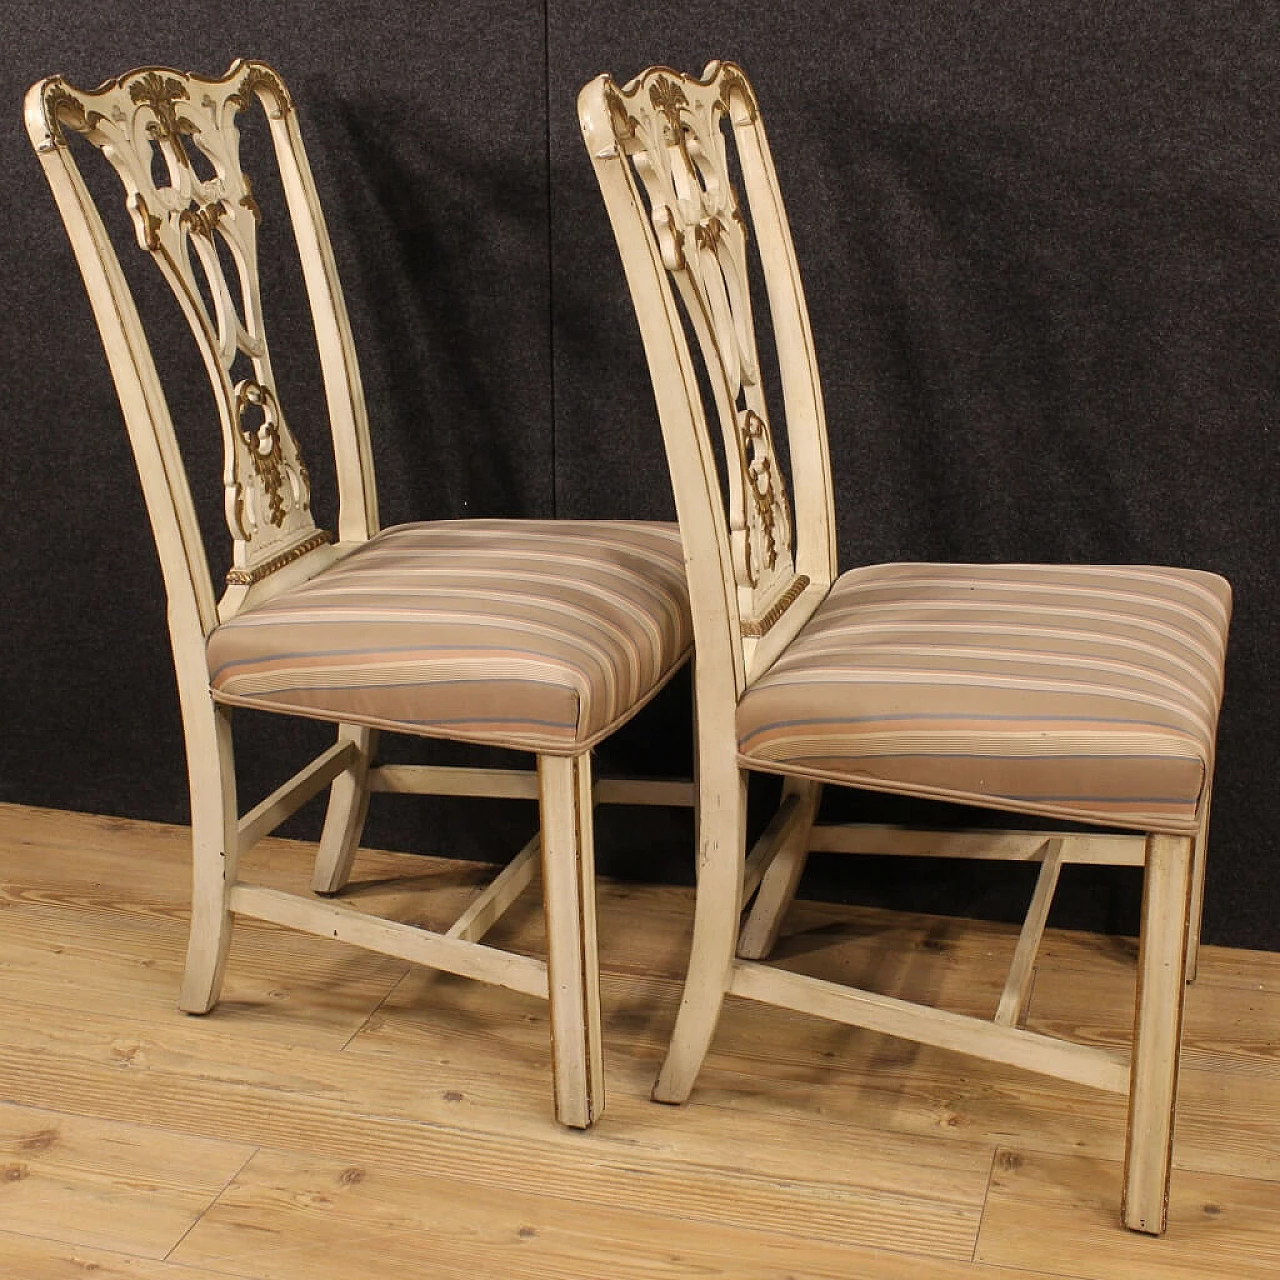 Pair of lacquered and gilded wood padded chairs 11